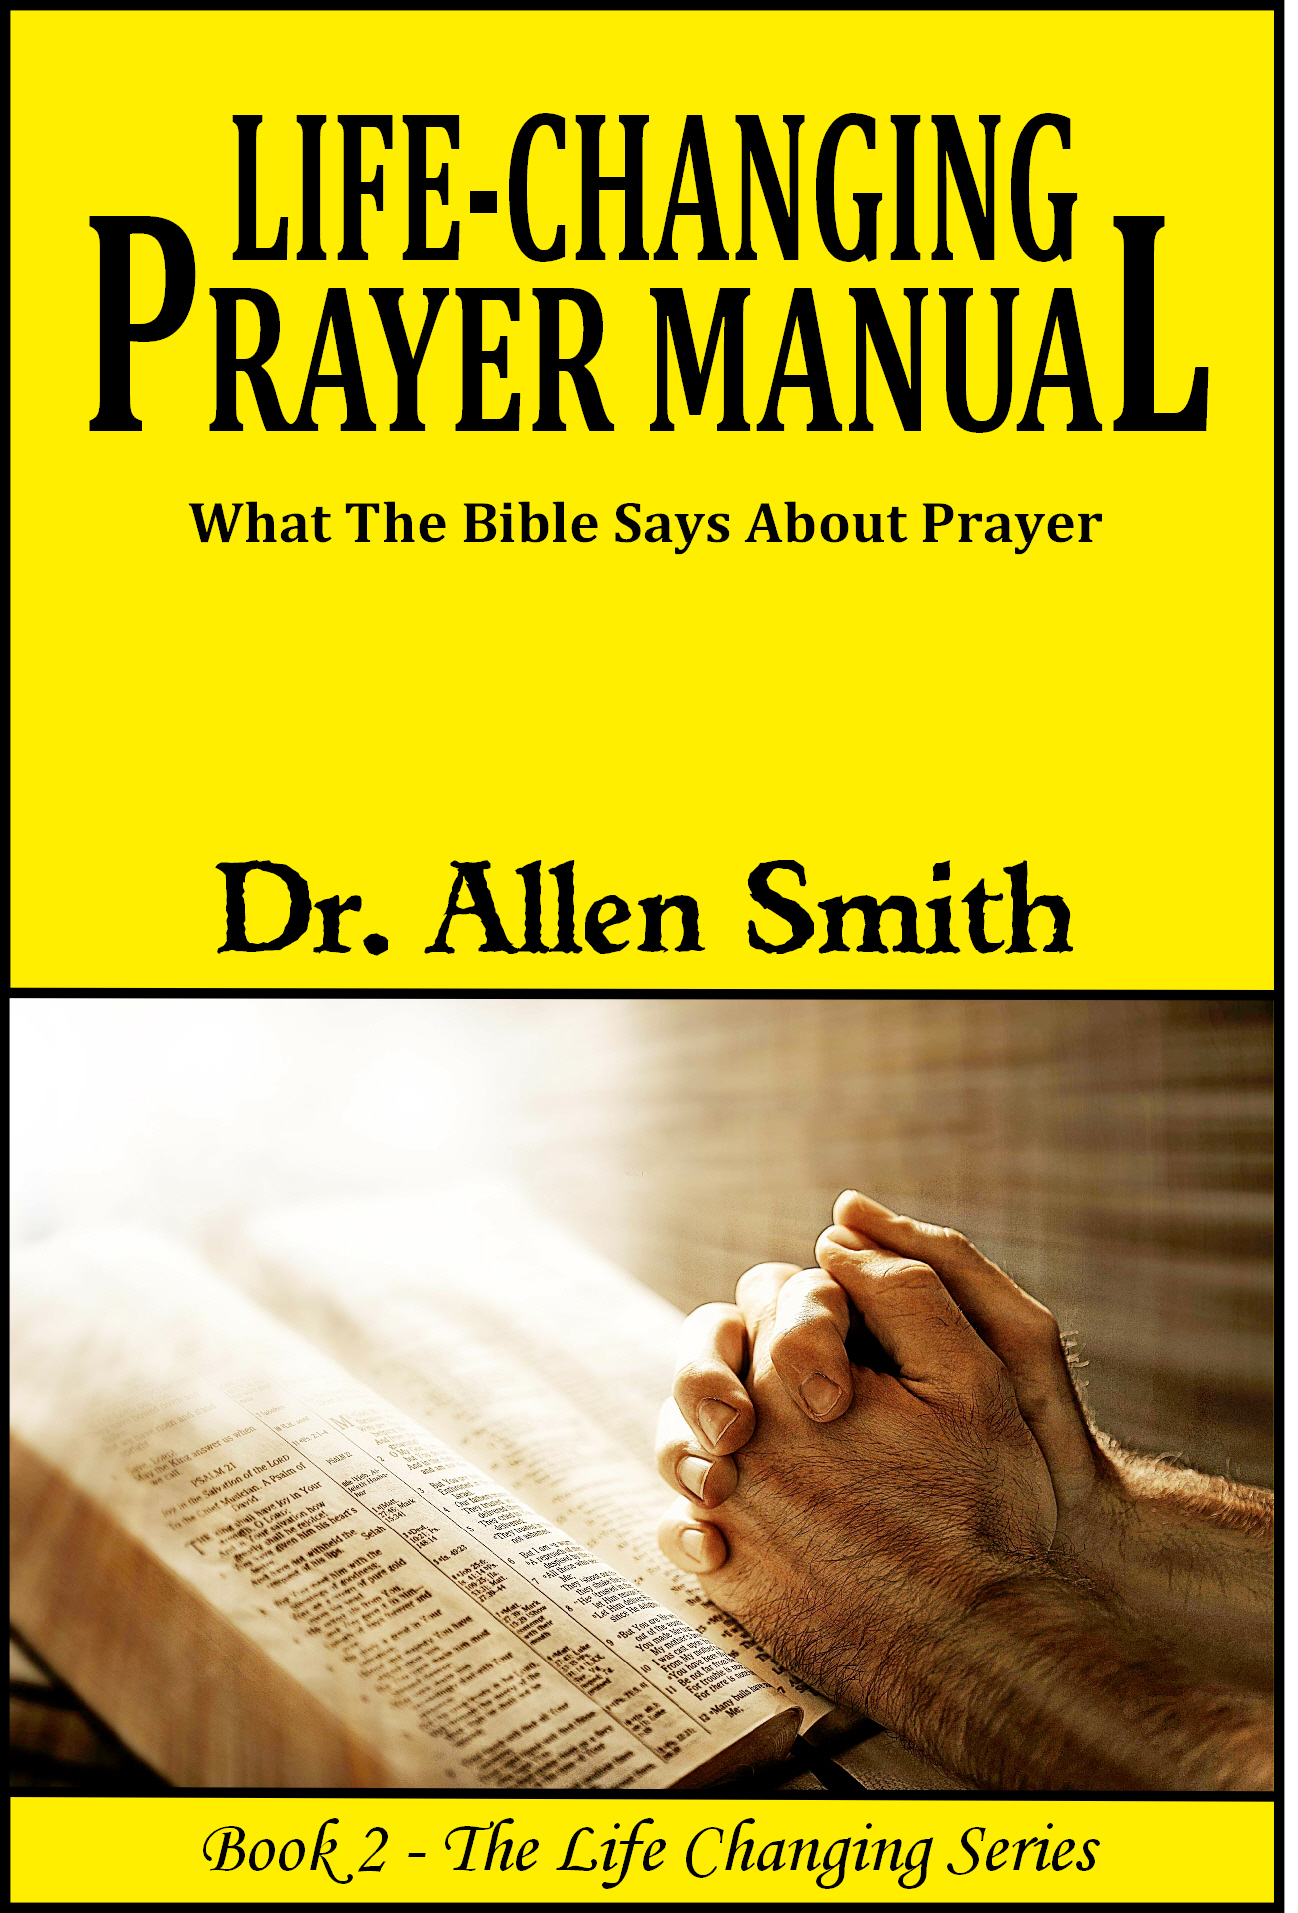 FREE: Life-Changing Prayer Manual by Dr. Allen Smith